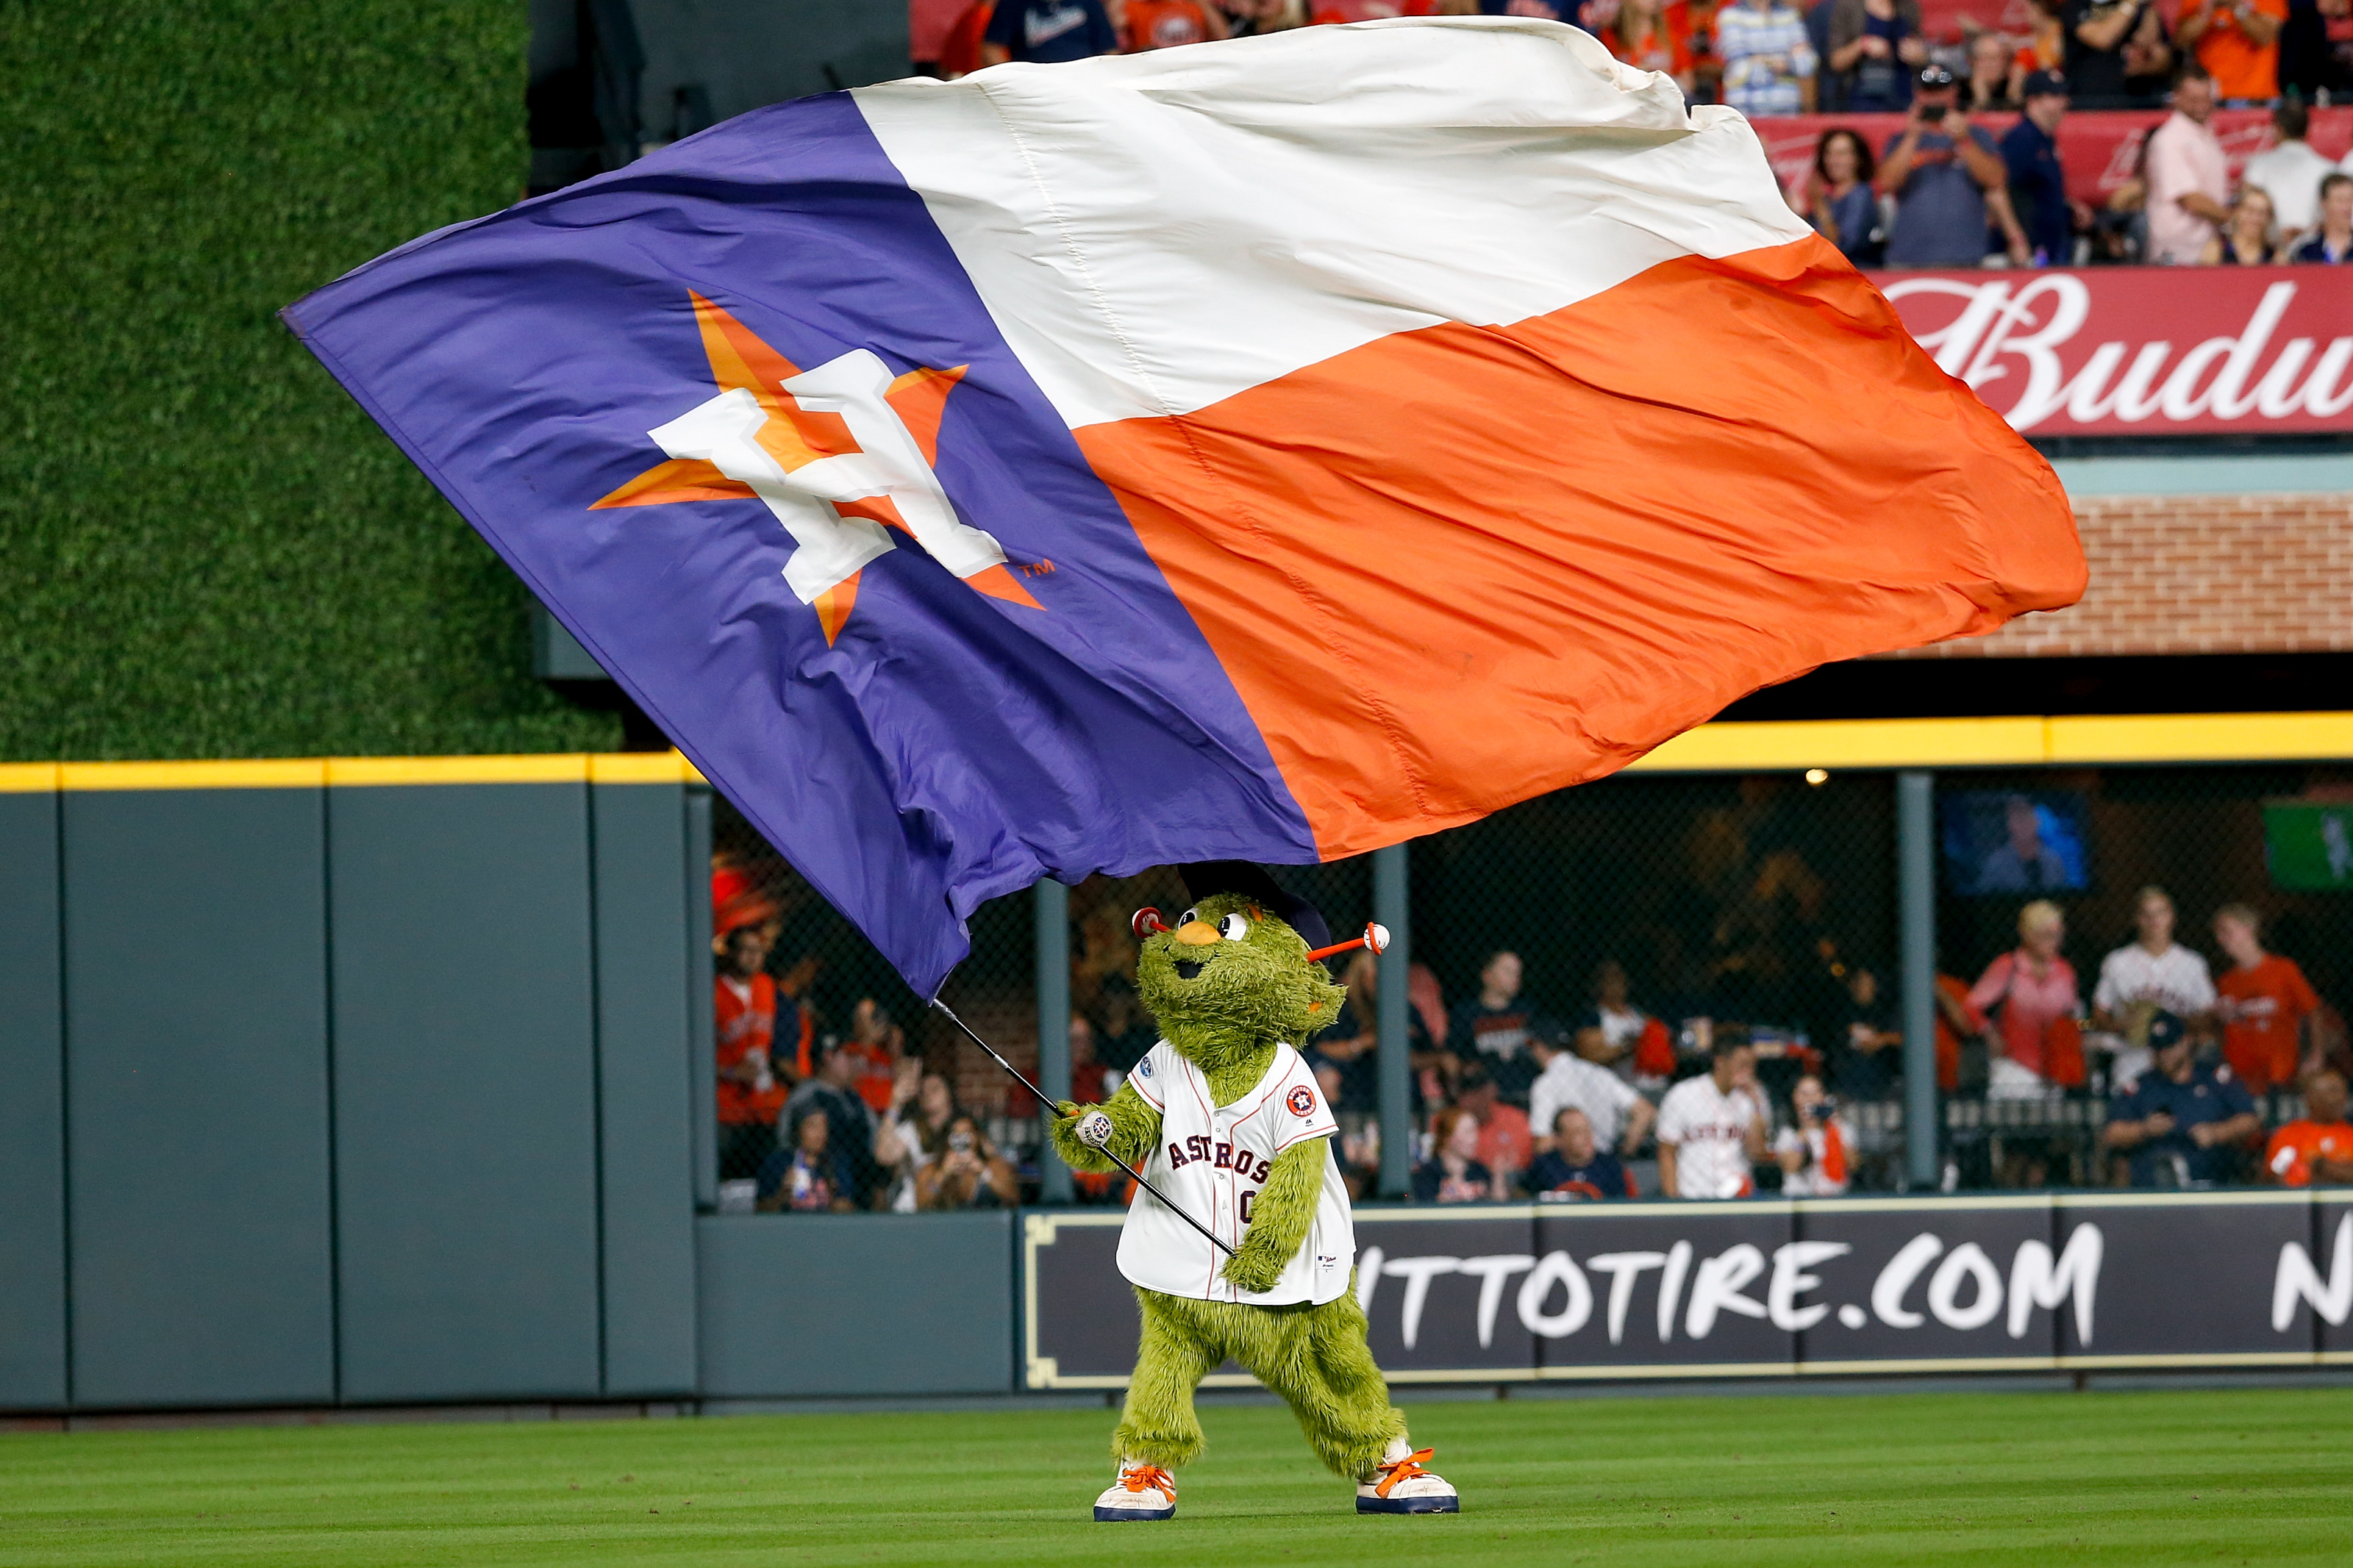 Orbit Has Likely Returned To Houston As The Astros' Mascot - The